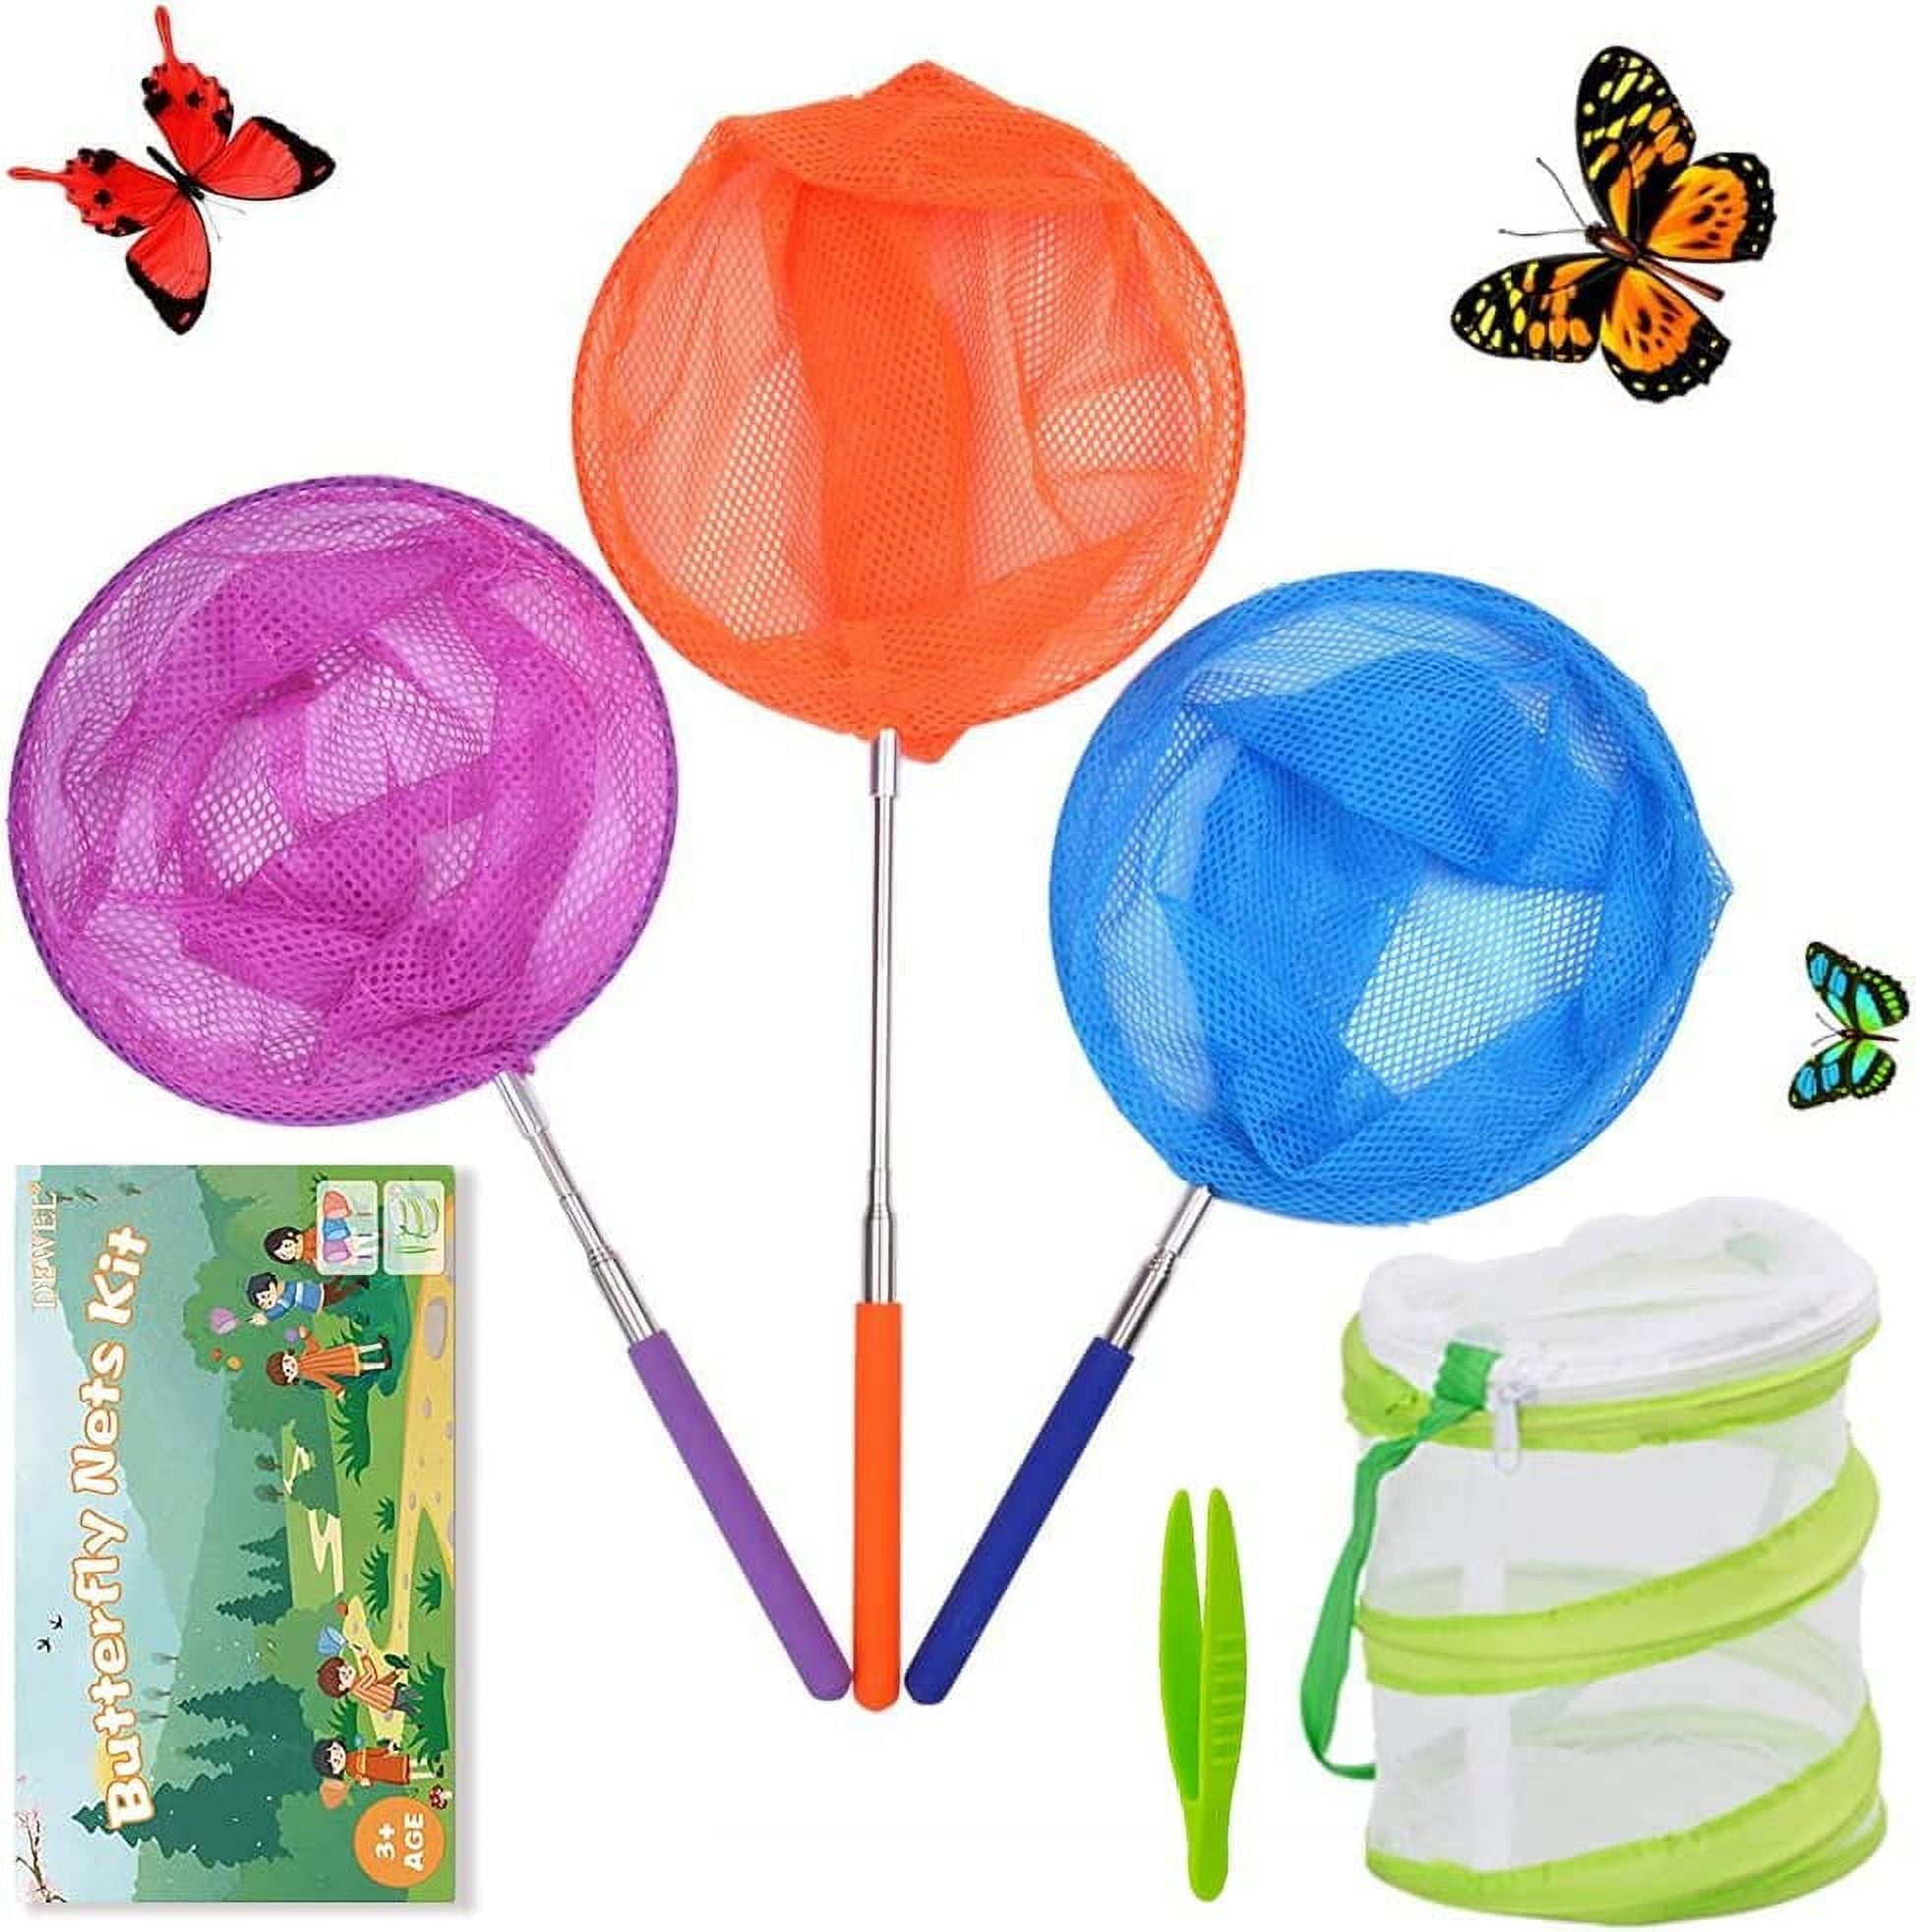 DEWEL 3 Pack Colored Telescopic Butterfly and Bug Catching Nets